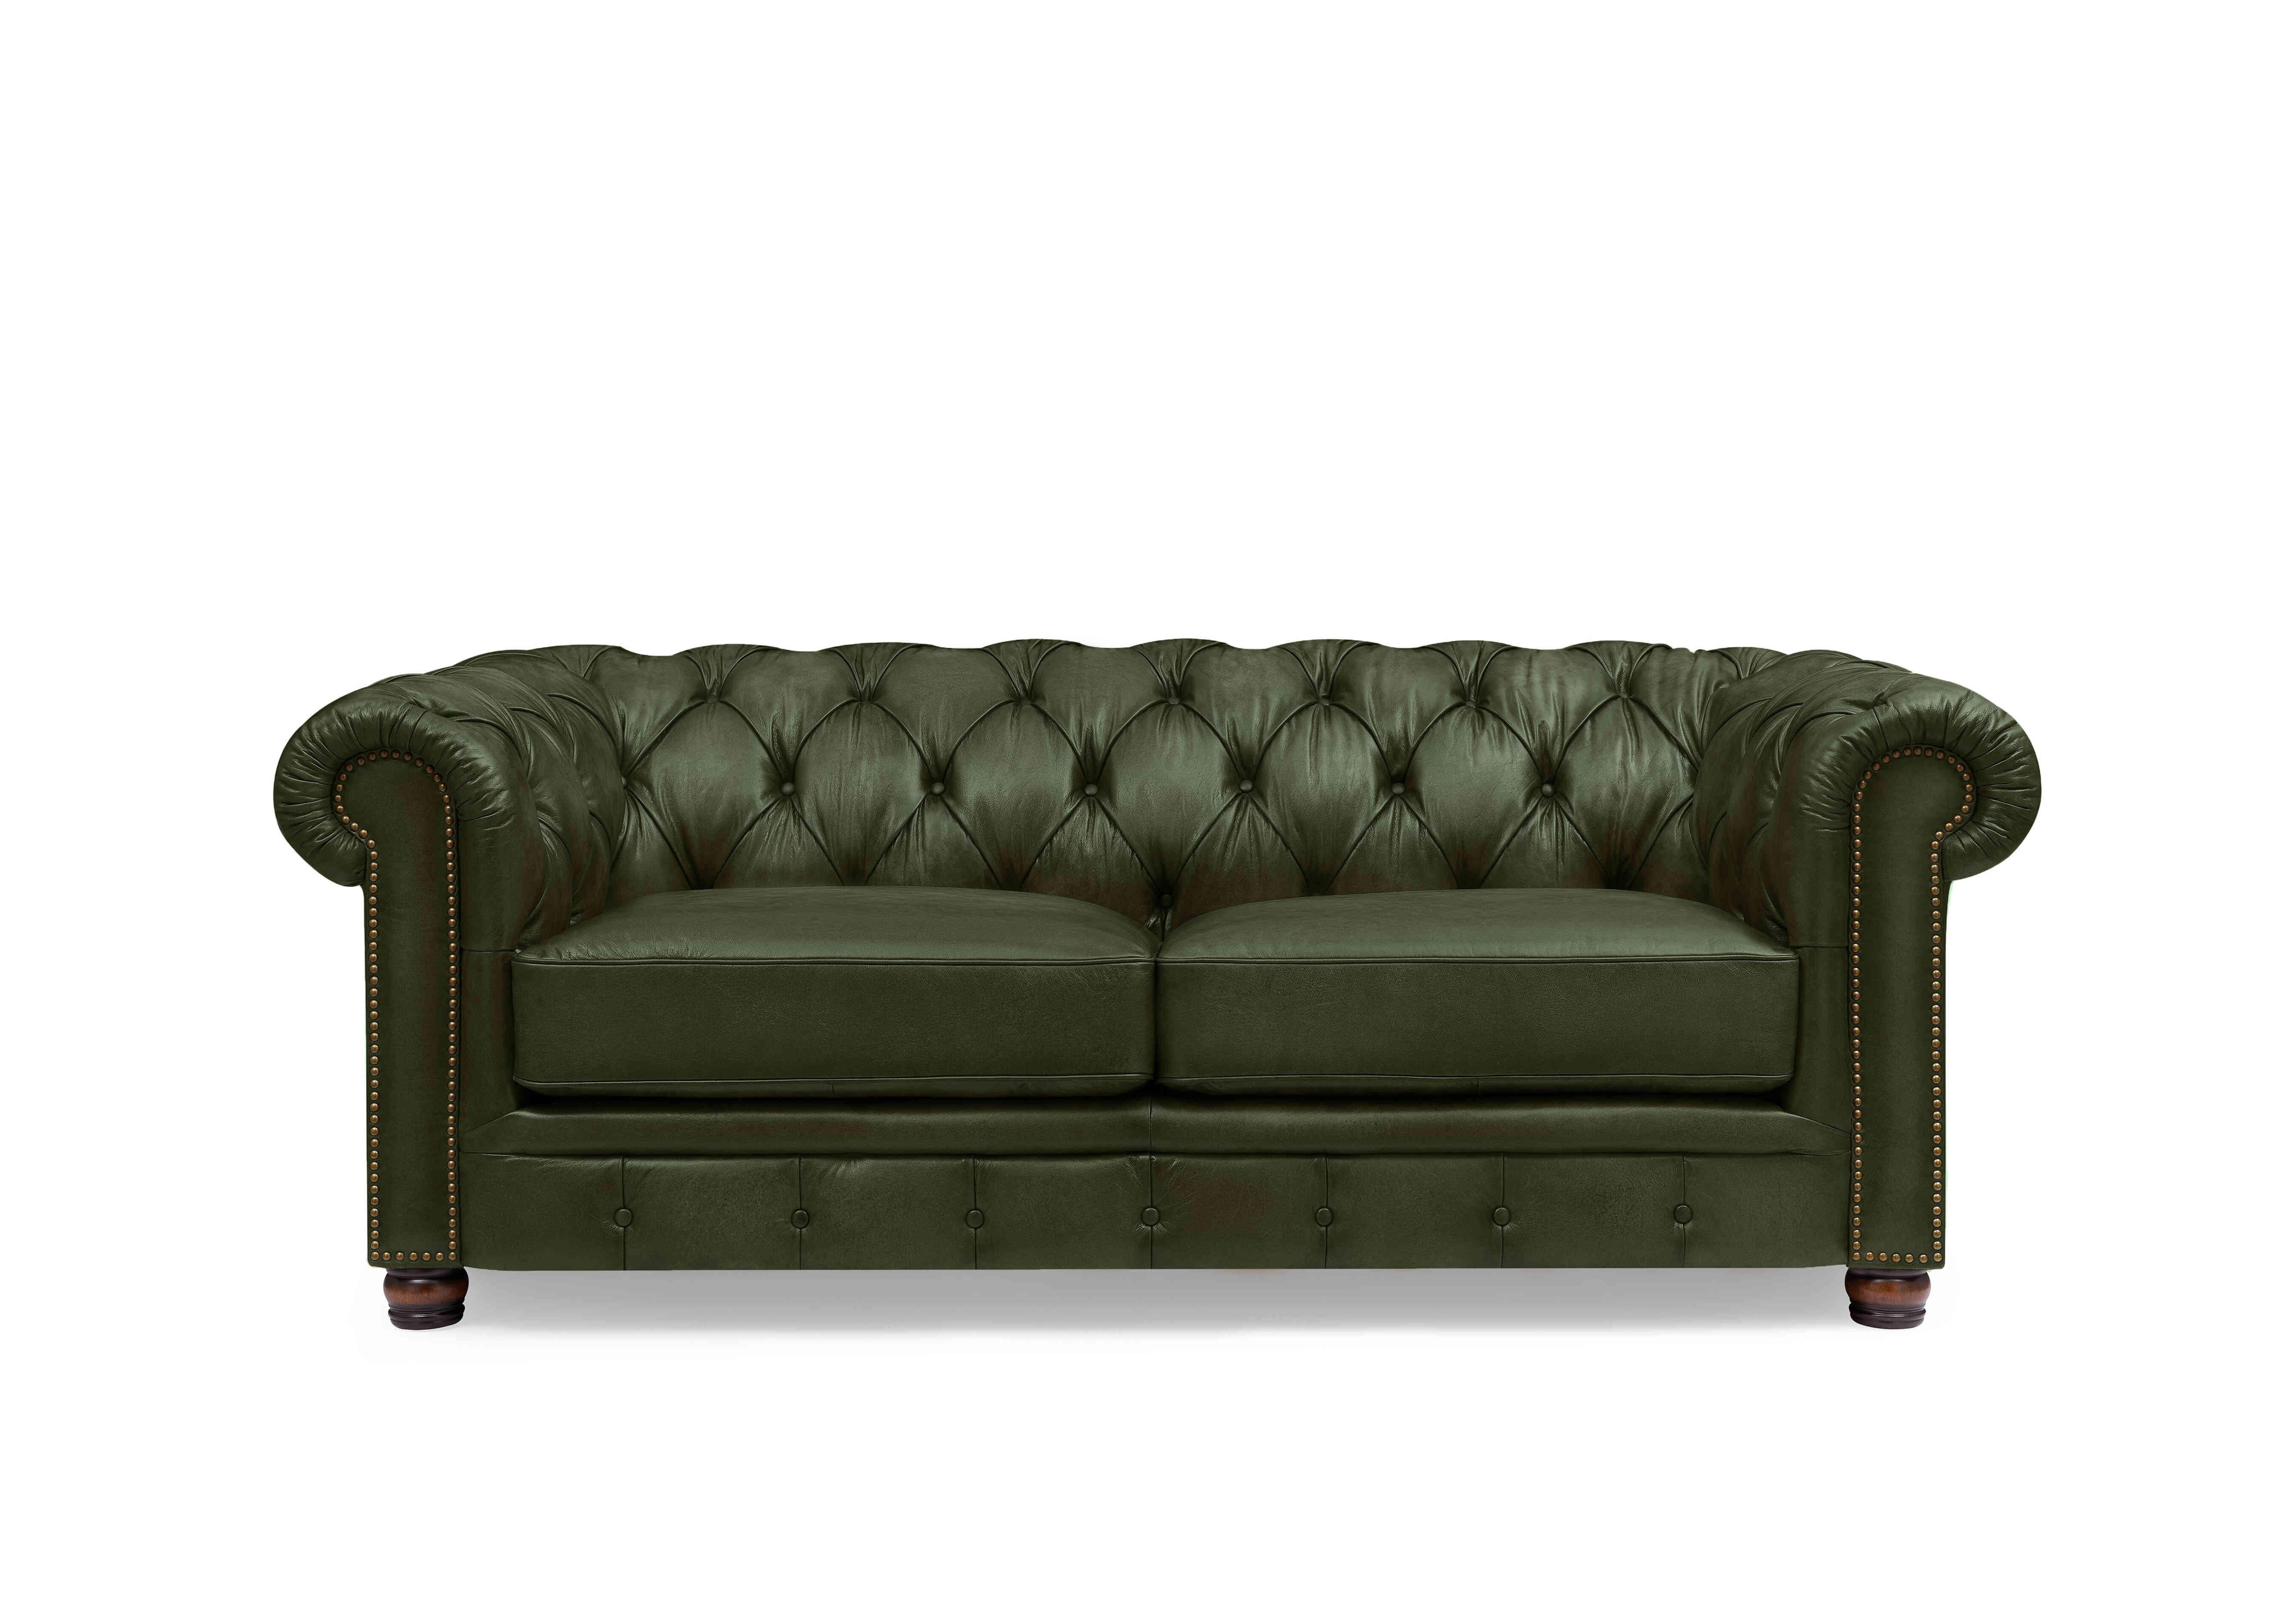 Shackleton 3 Seater Leather Chesterfield Sofa in X3y1-1965ls Emerald on Furniture Village